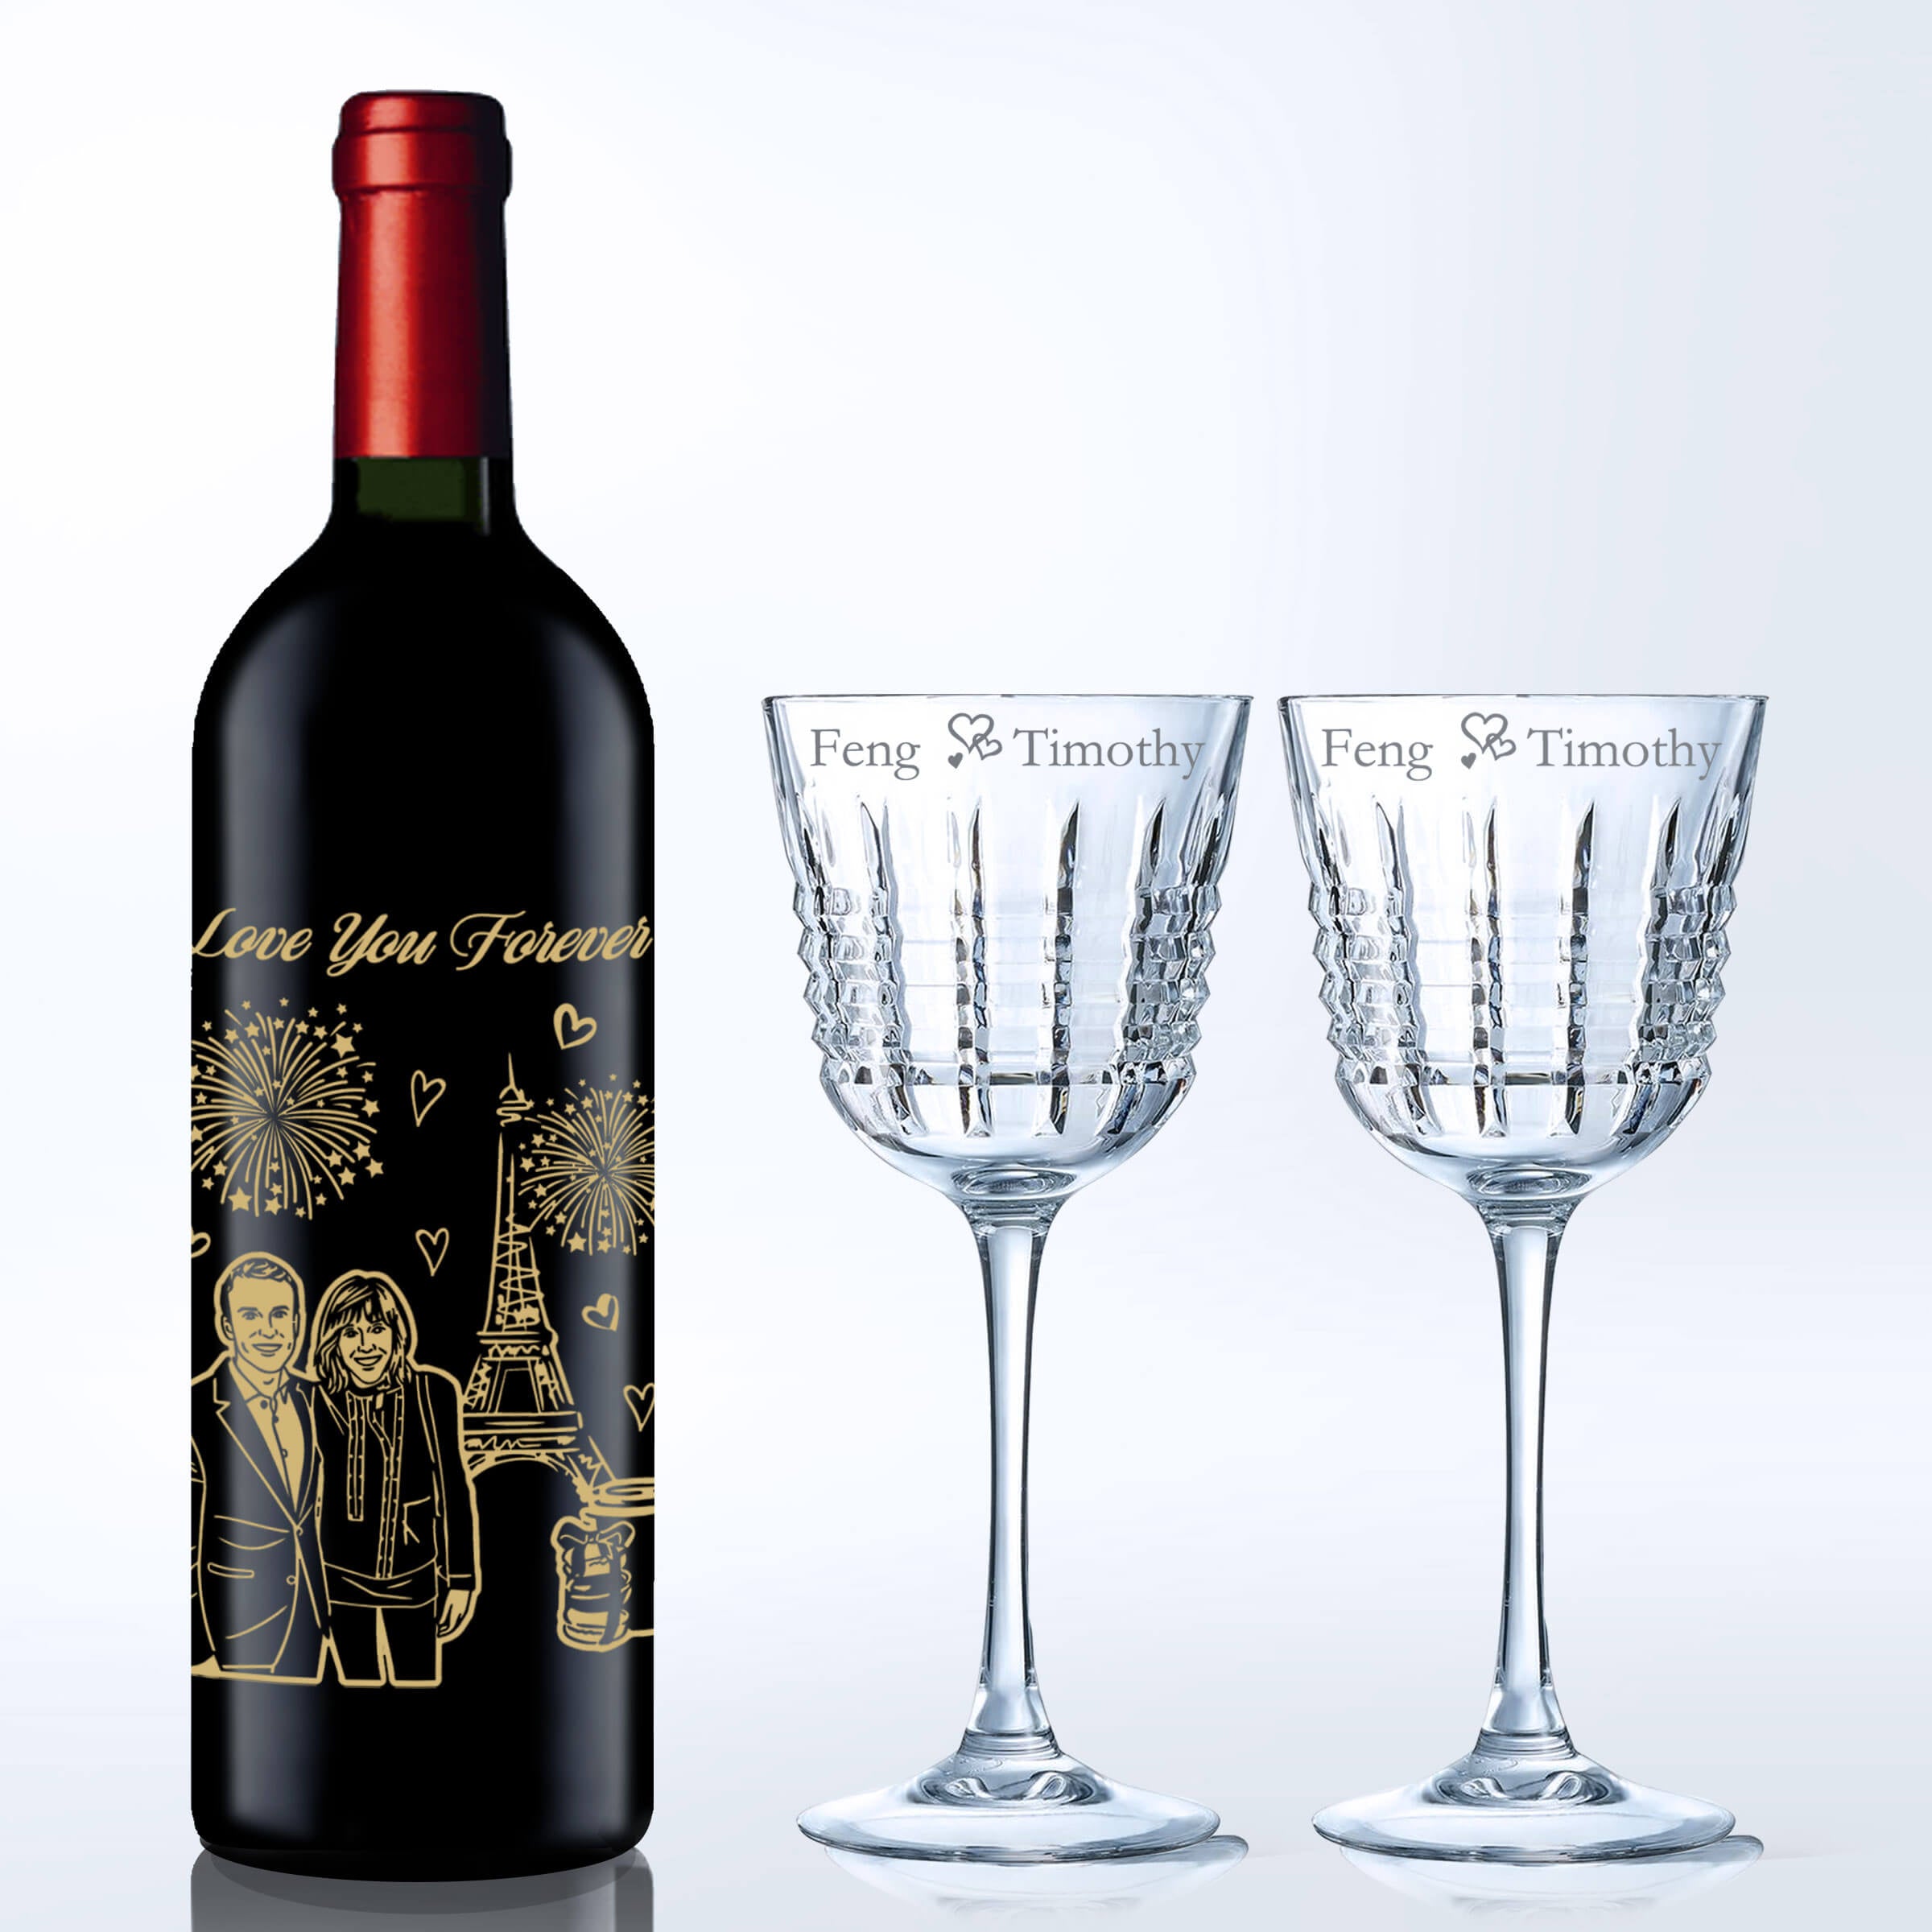 Cristal D'arques-Rendez-Vous Wine Glasses & Chateau Bonnet Red with Engraving| | 甜蜜之約系列紅酒杯與勃納城堡幹紅套裝（含名字人像雕刻） - Design Your Own Wine